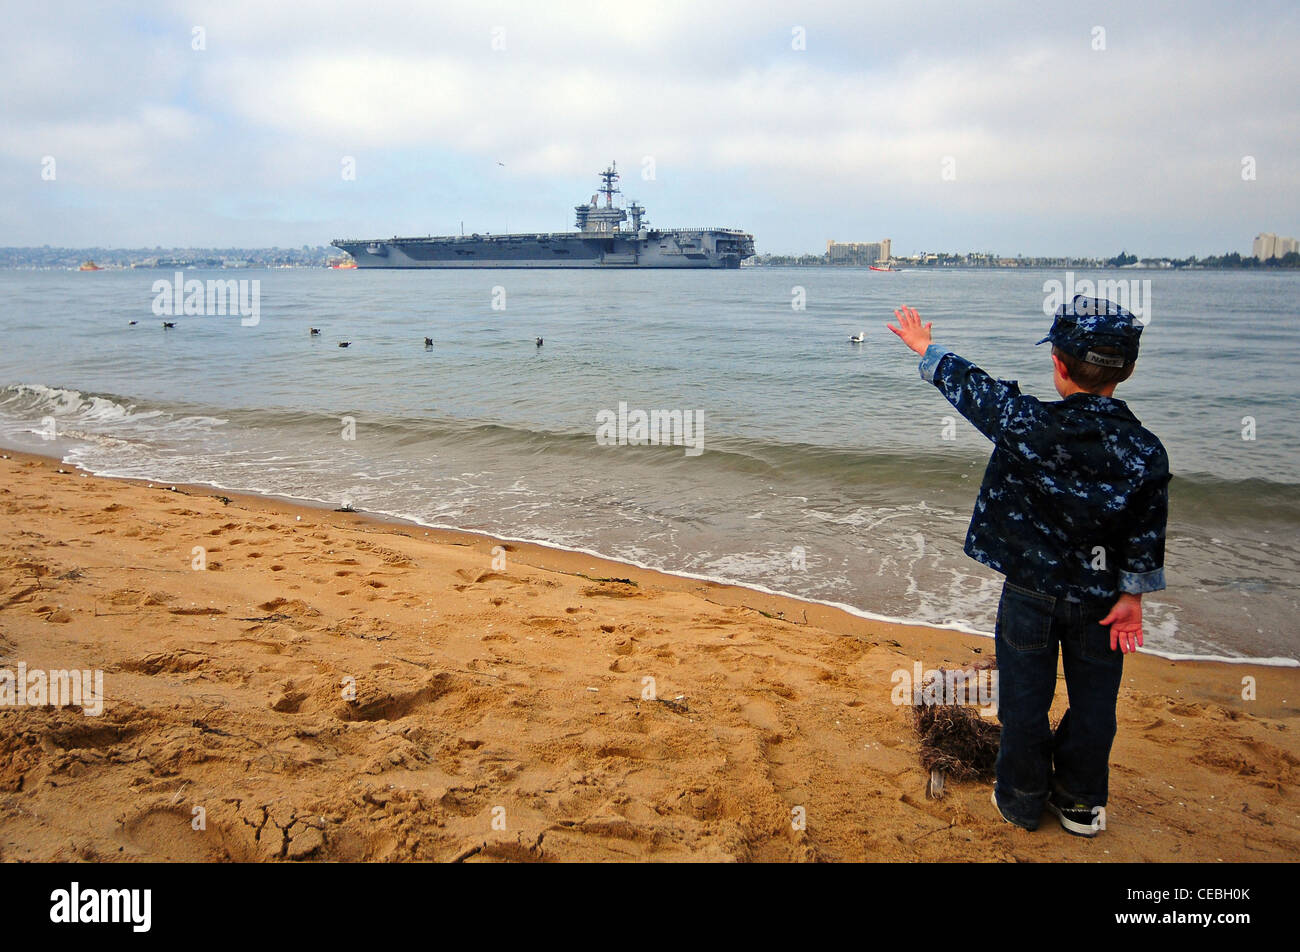 The son of Electrician’s Mate (Nuclear) 1st Class Randall White, assigned to the Nimitz-class aircraft carrier USS Carl Vinson (CVN 70), waves to his father’s ship as it transits San Diego Bay after departing Naval Air Station North Island on a scheduled deployment to the western Pacific region. Stock Photo